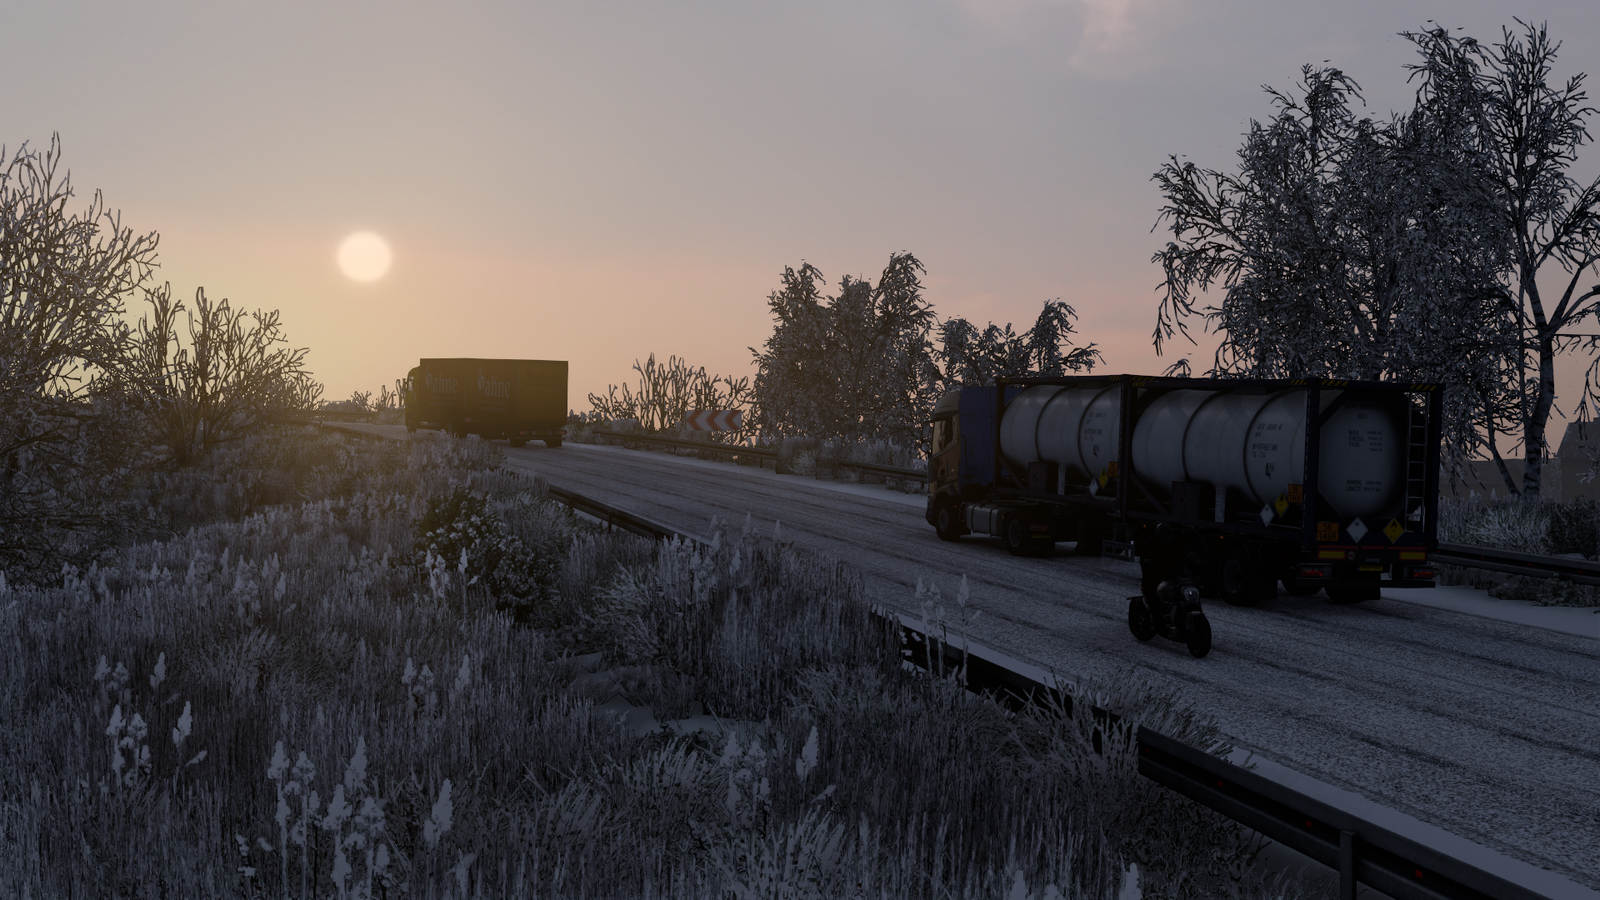 ets2_20221212_083521_00.png